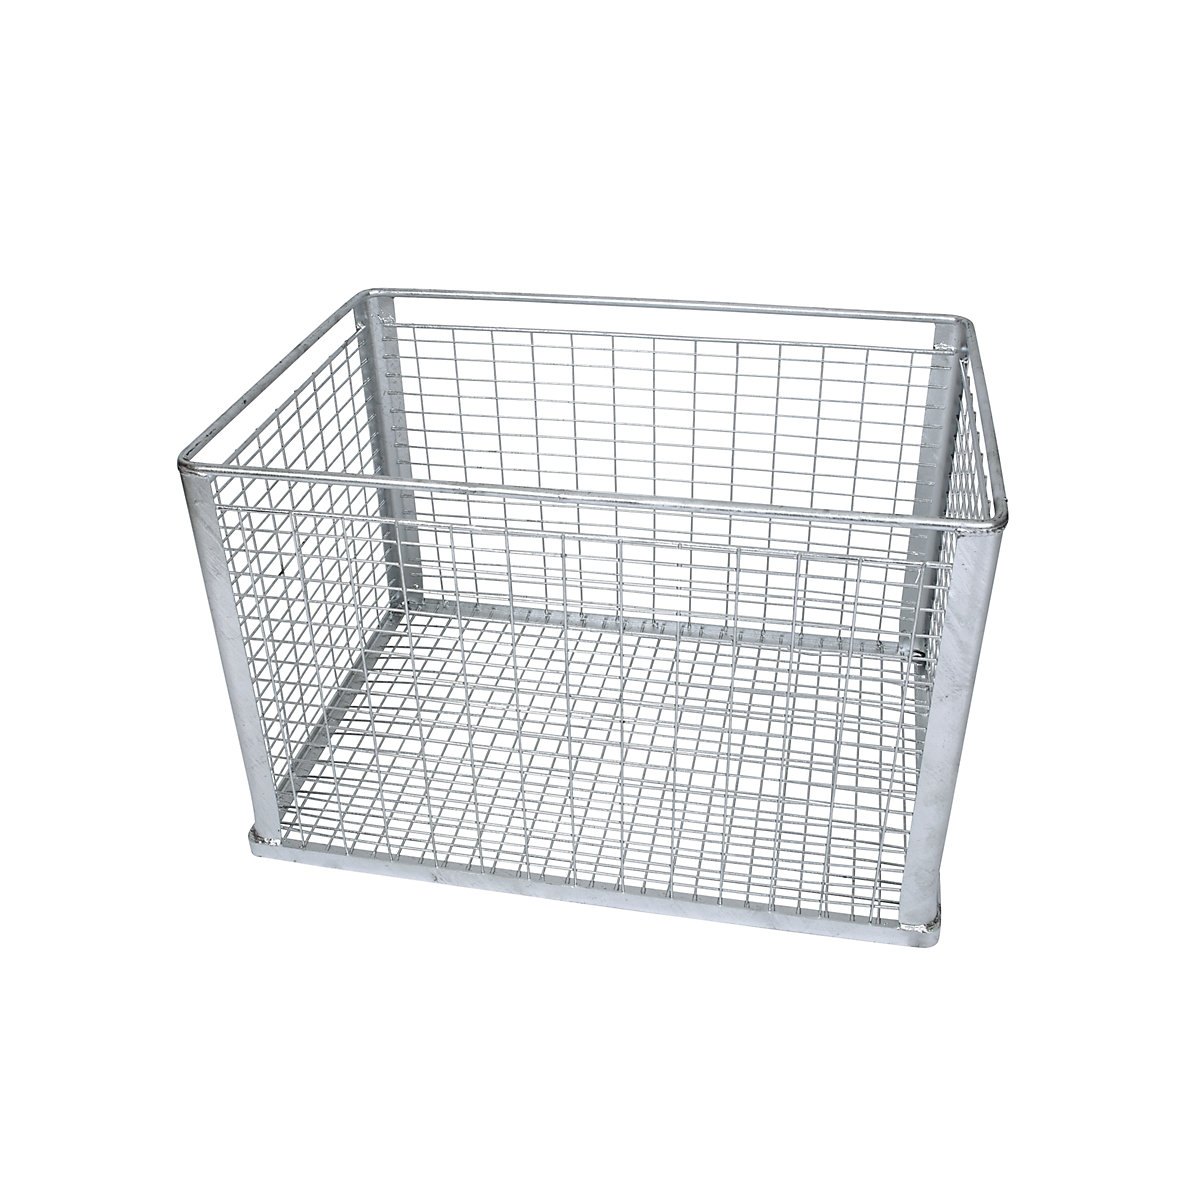 Stacking basket for heavy items, large mesh size, external dims. LxWxH 815 x 565 x 525 mm-7